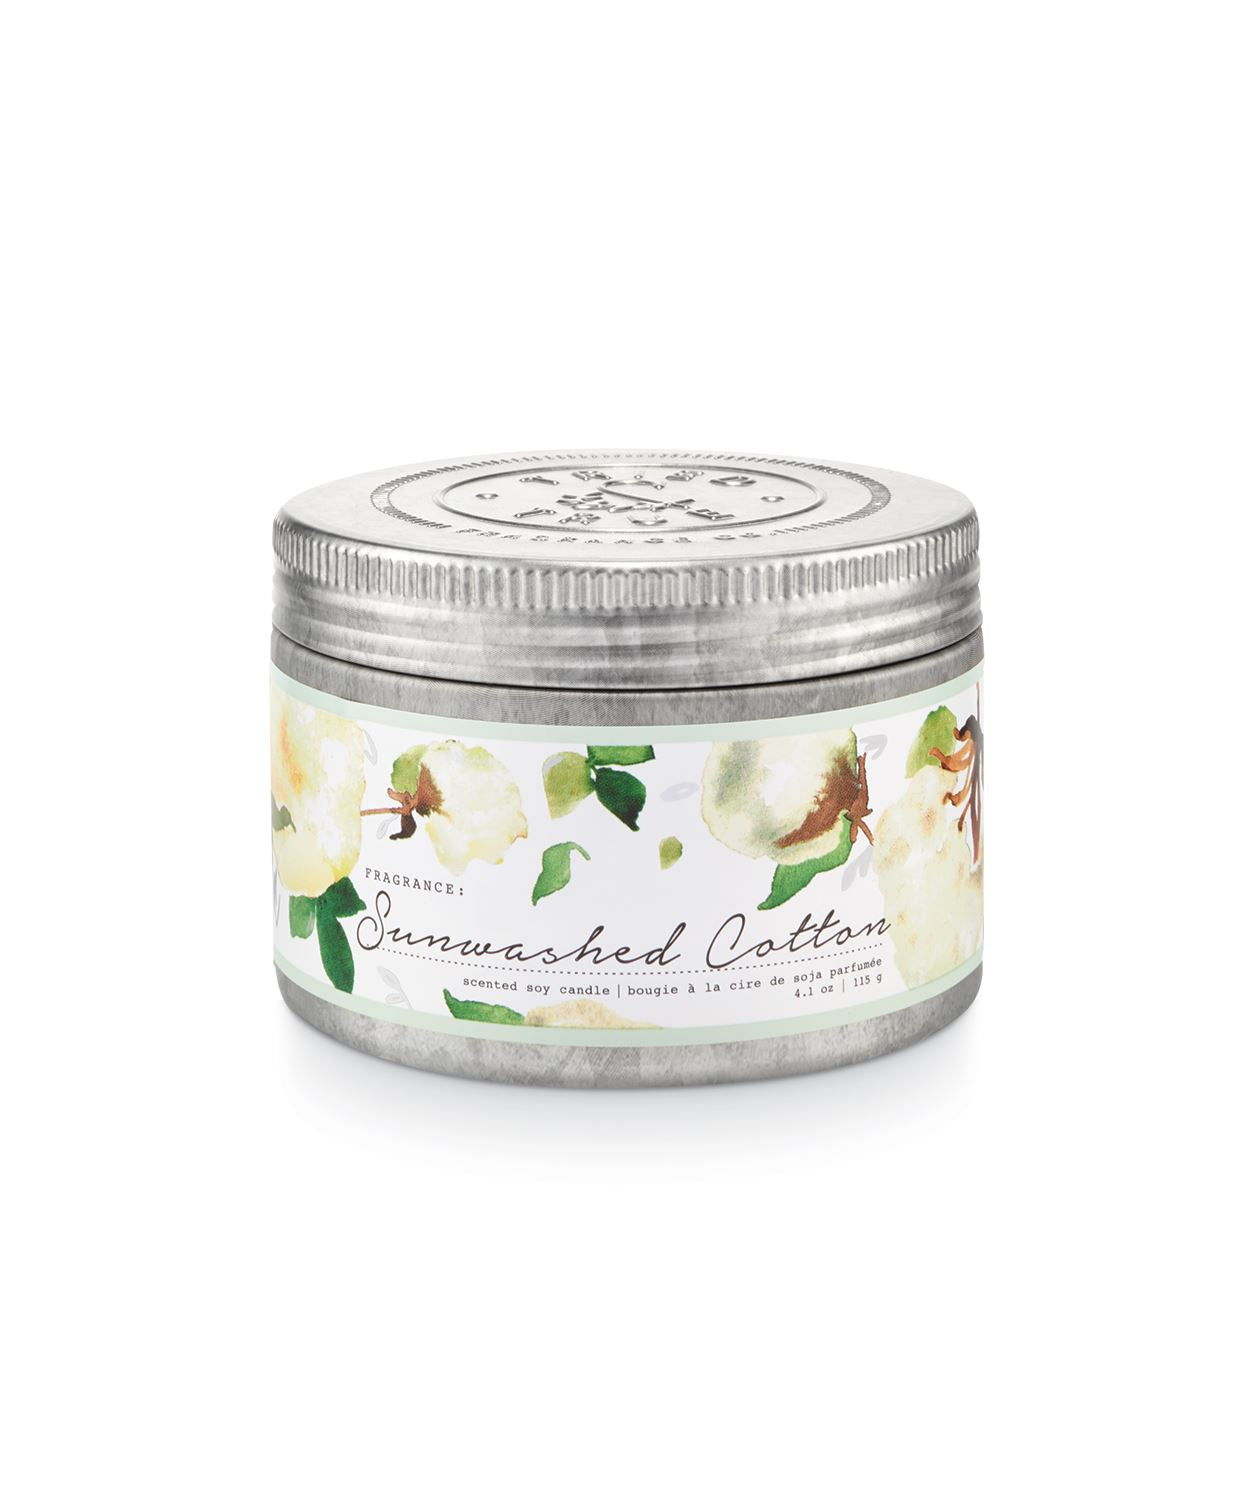 Tried & True Small Tin Candle: Sunwashed Cotton